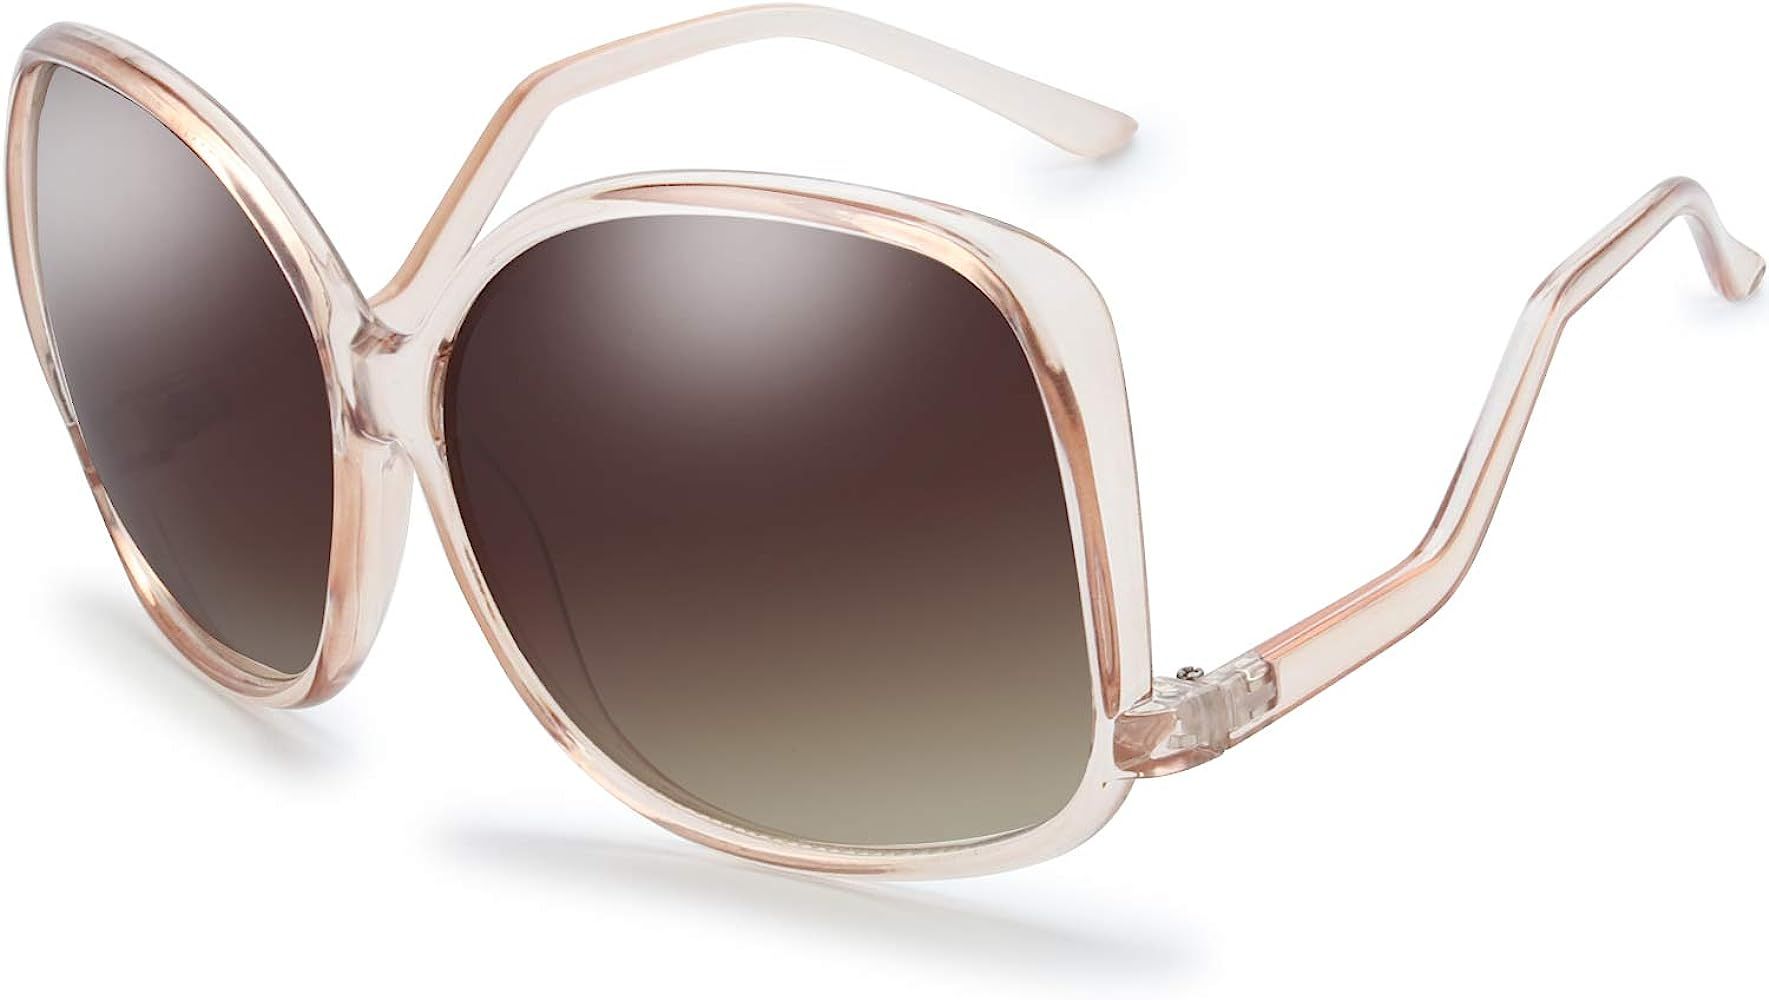 Women's Oversized Square Jackie O Cat Eye Hybrid Butterfly Fashion Sunglasses - Exquisite Packaging | Amazon (US)